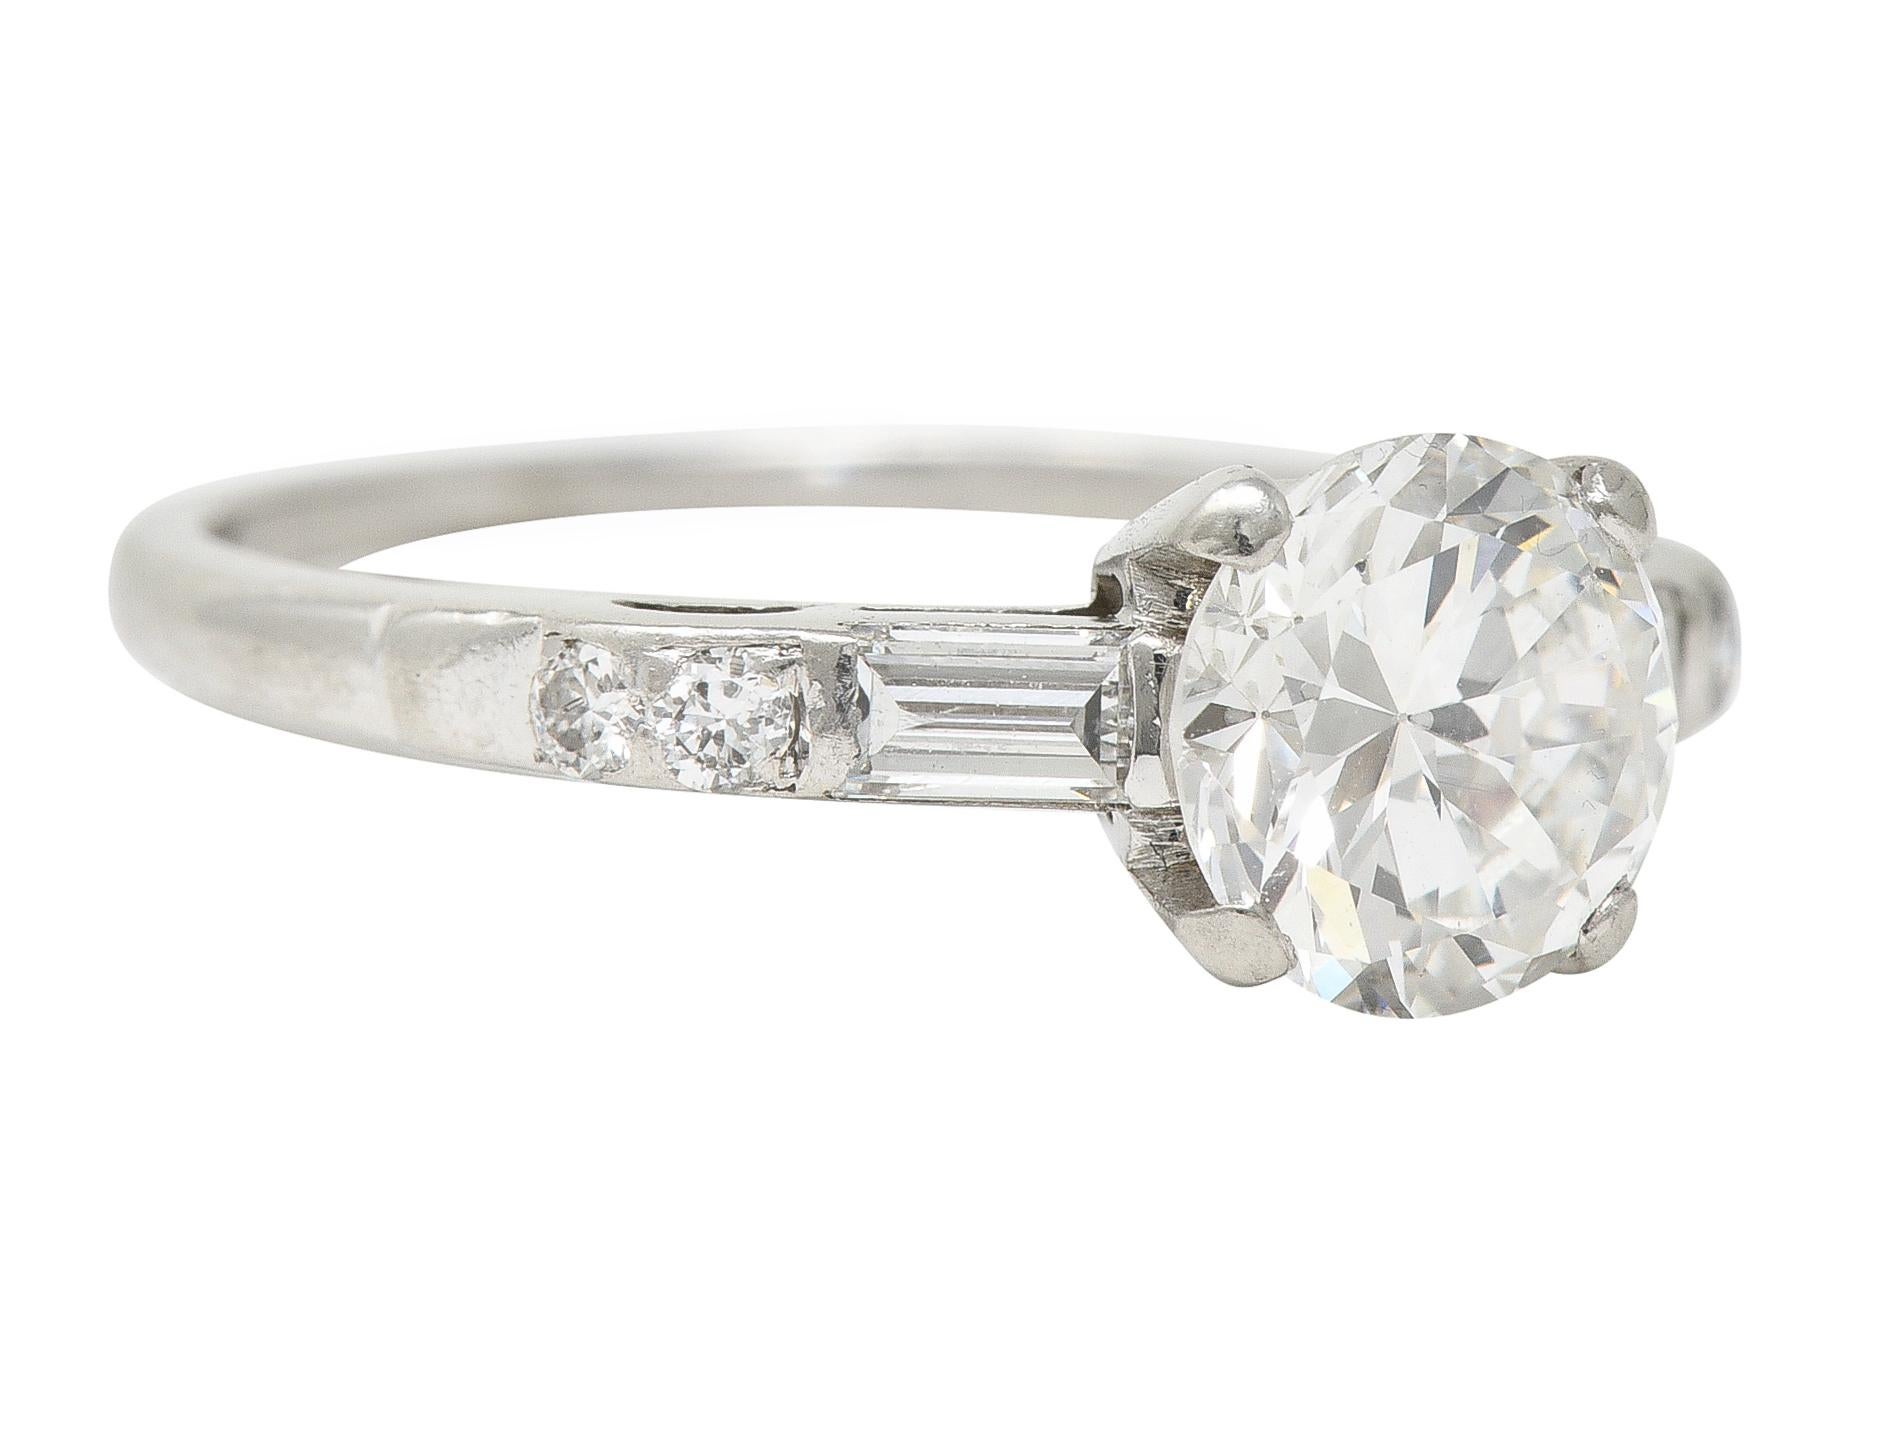 Centering a transitional cut diamond weighing approximately 0.97 carat total - H color with SI1 clarity
Prong set in basket and flanked by additional transitional and baguette cut diamonds
Weighing approximately 0.19 carat total - eye clean and